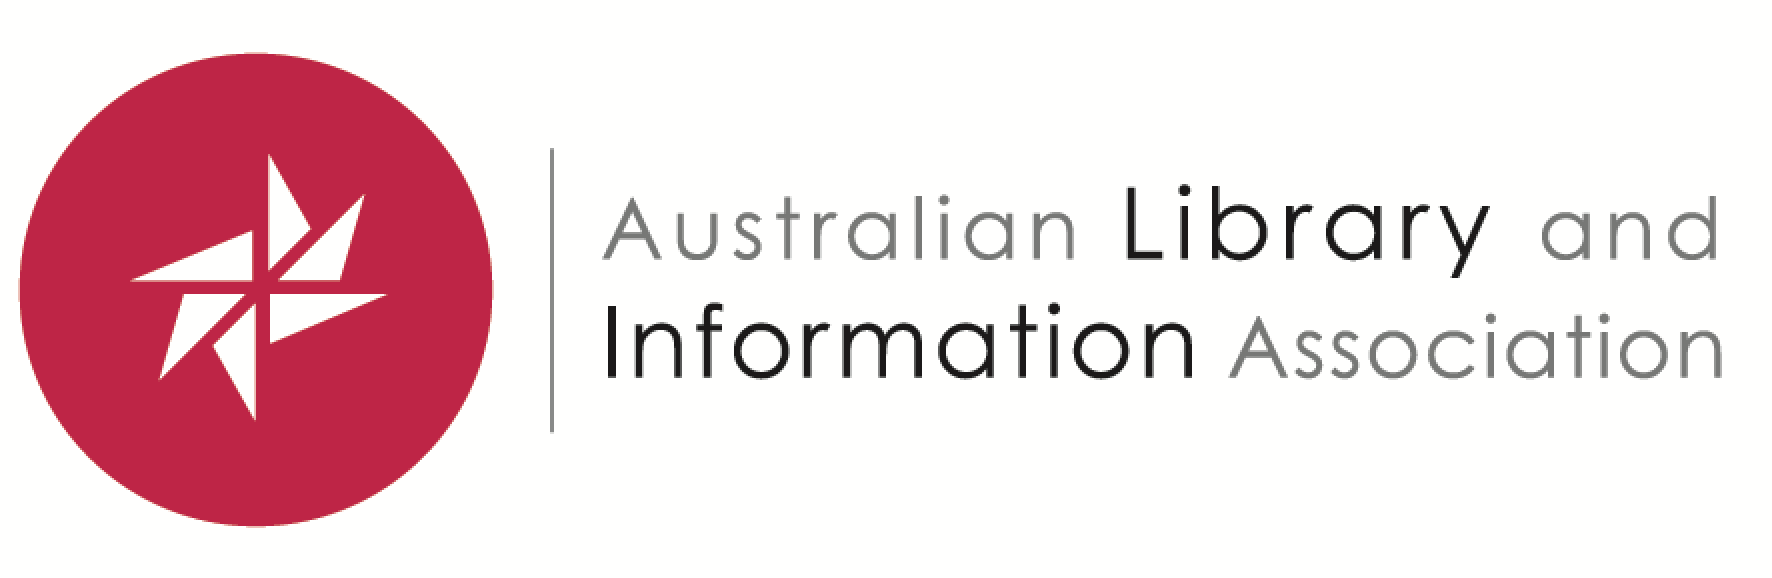 The Australian Library and Information Association